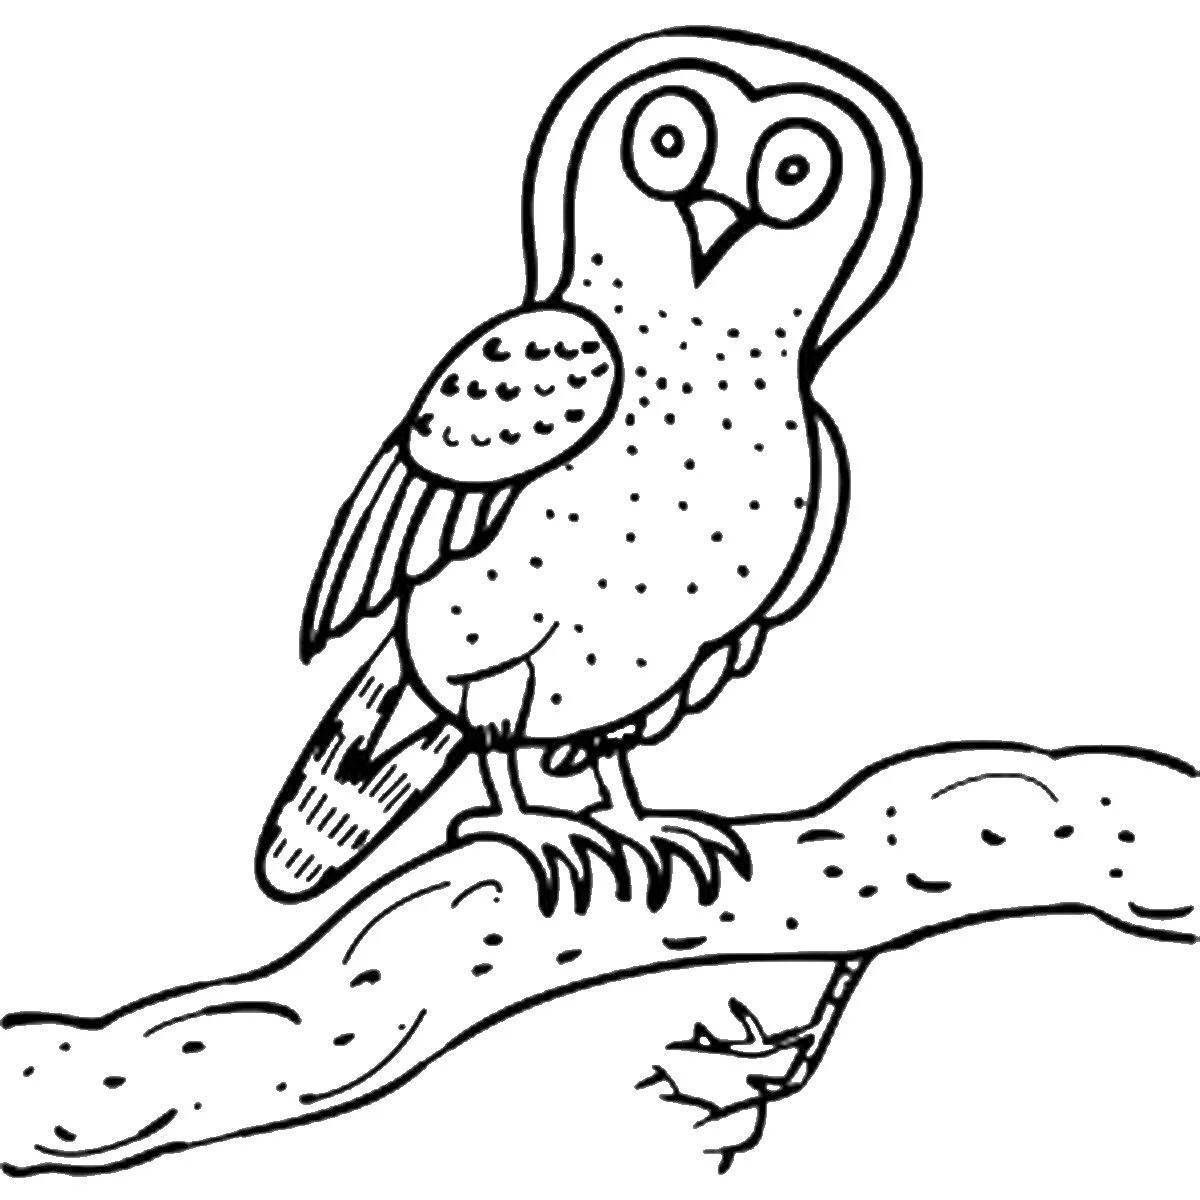 Owl on branch #5